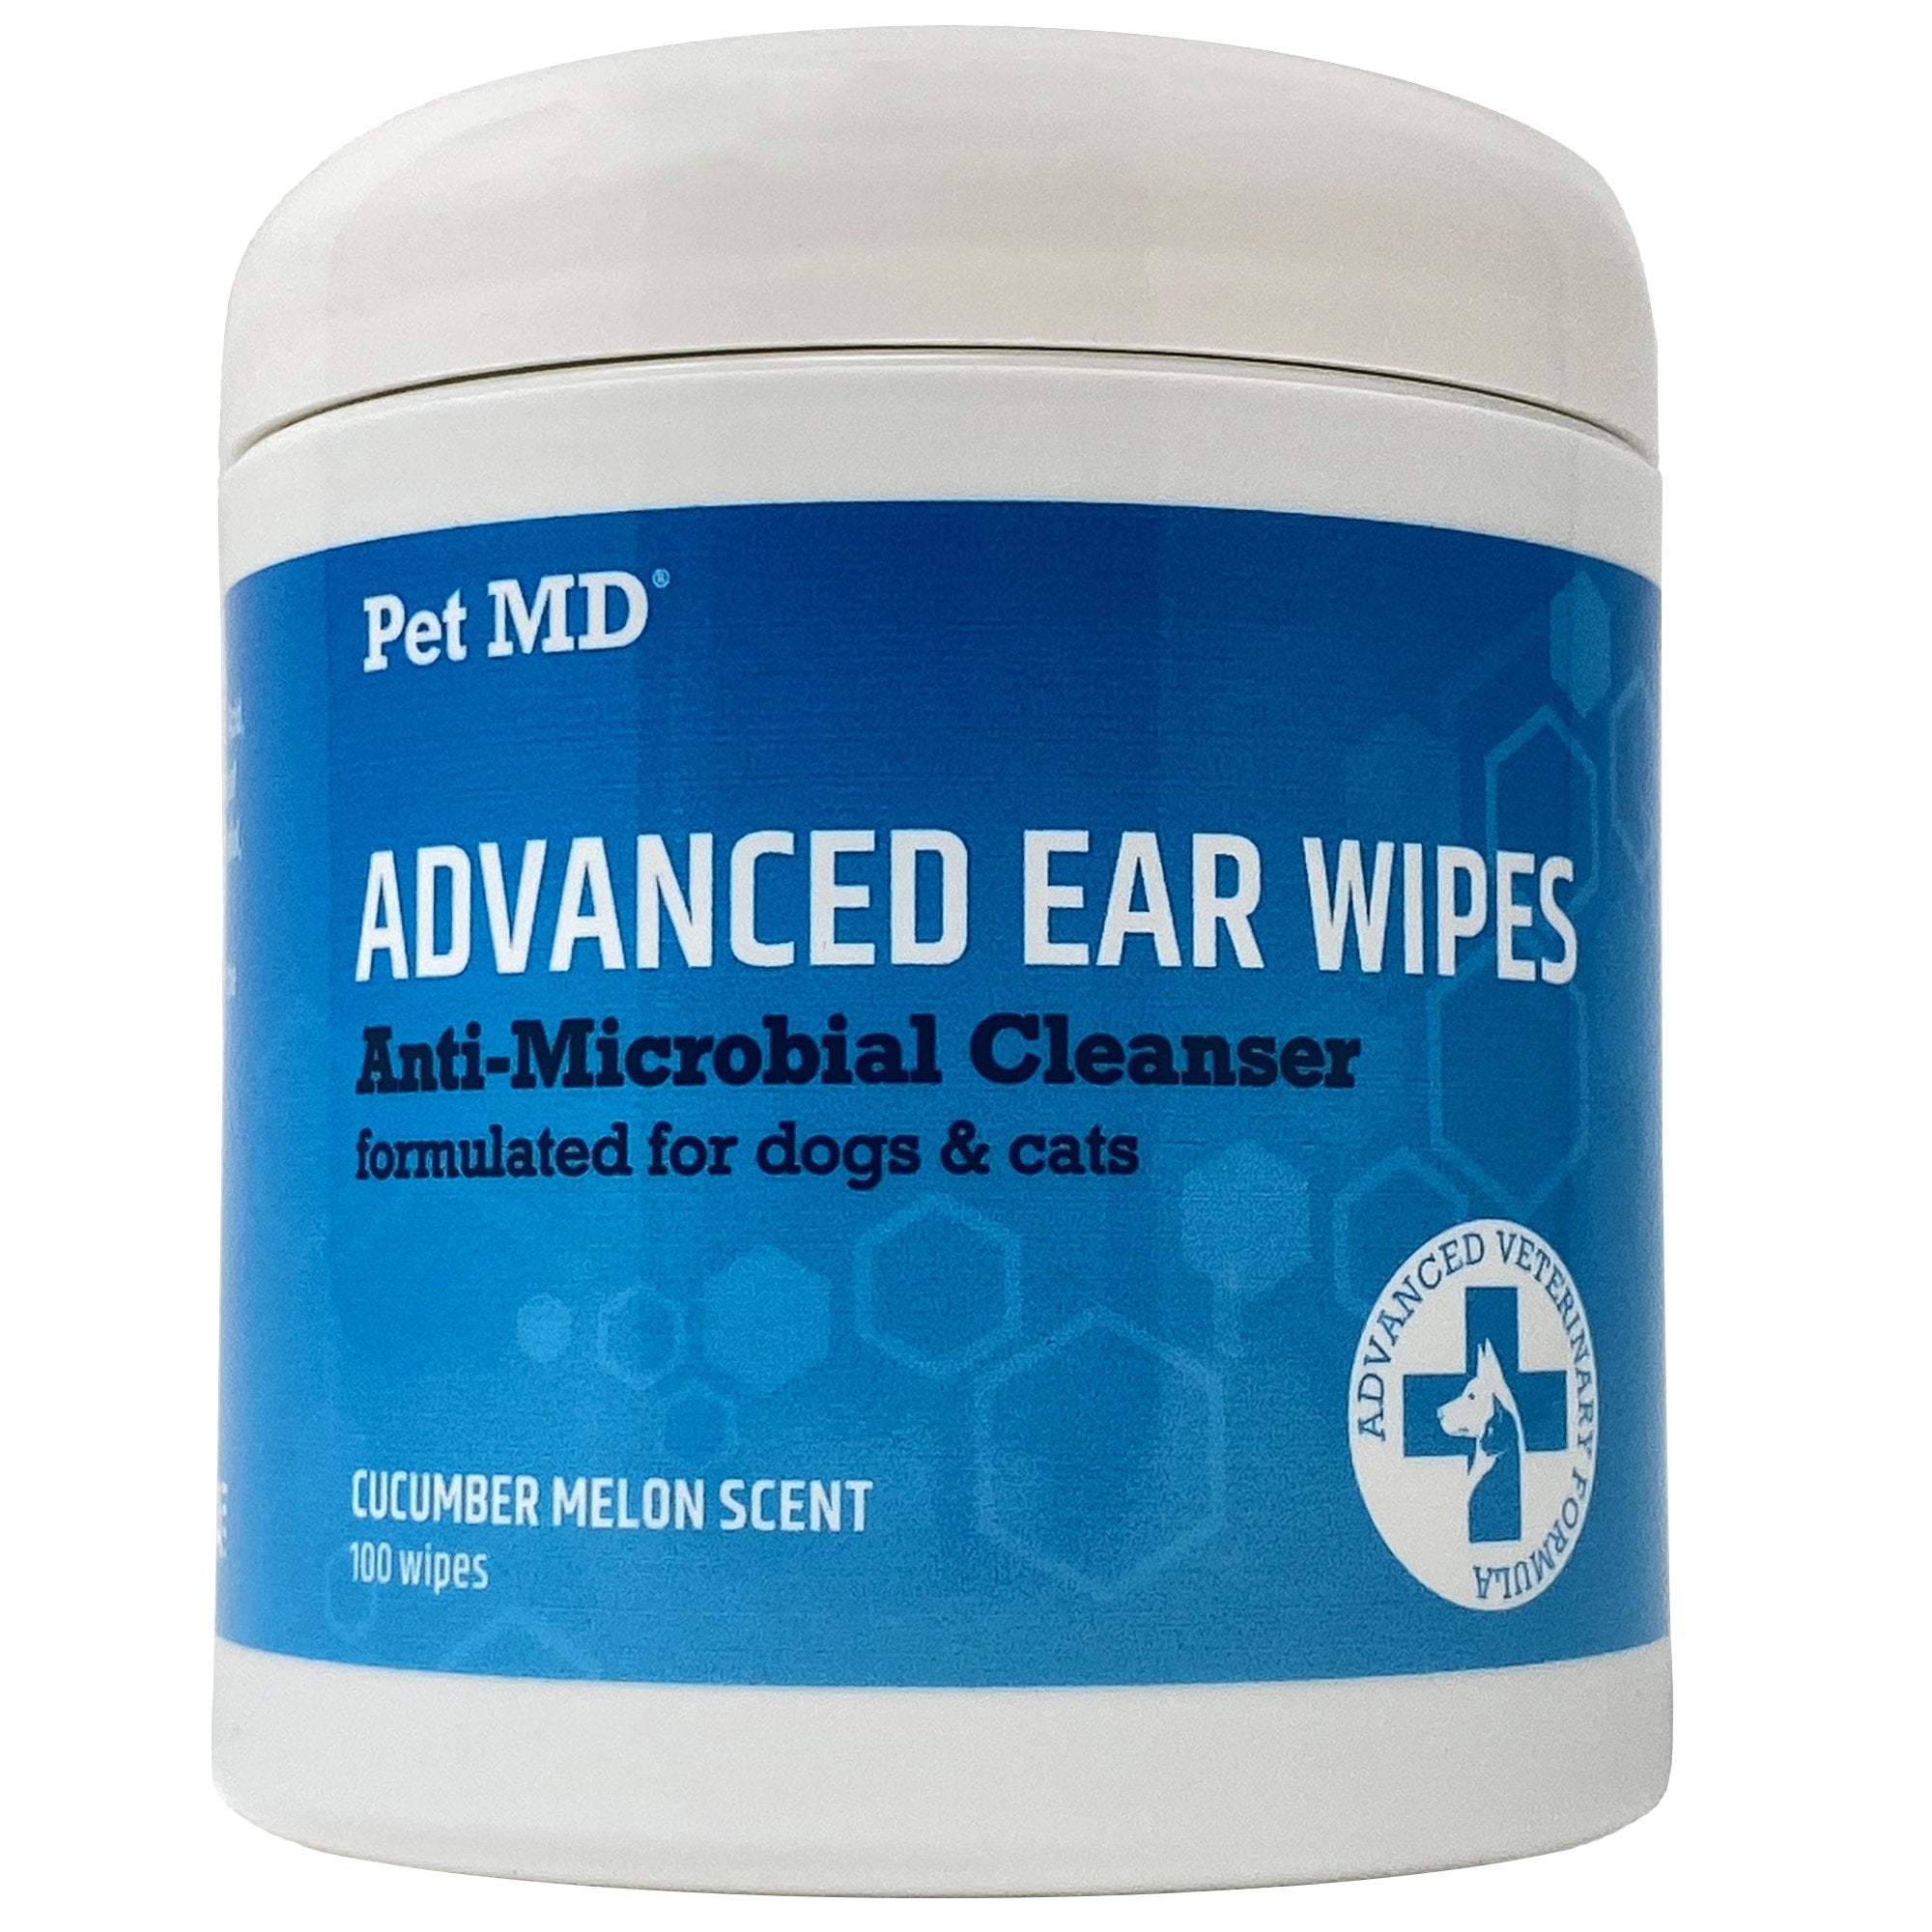 Advanced Ear Wipes for Dogs & Cats - 100 Count